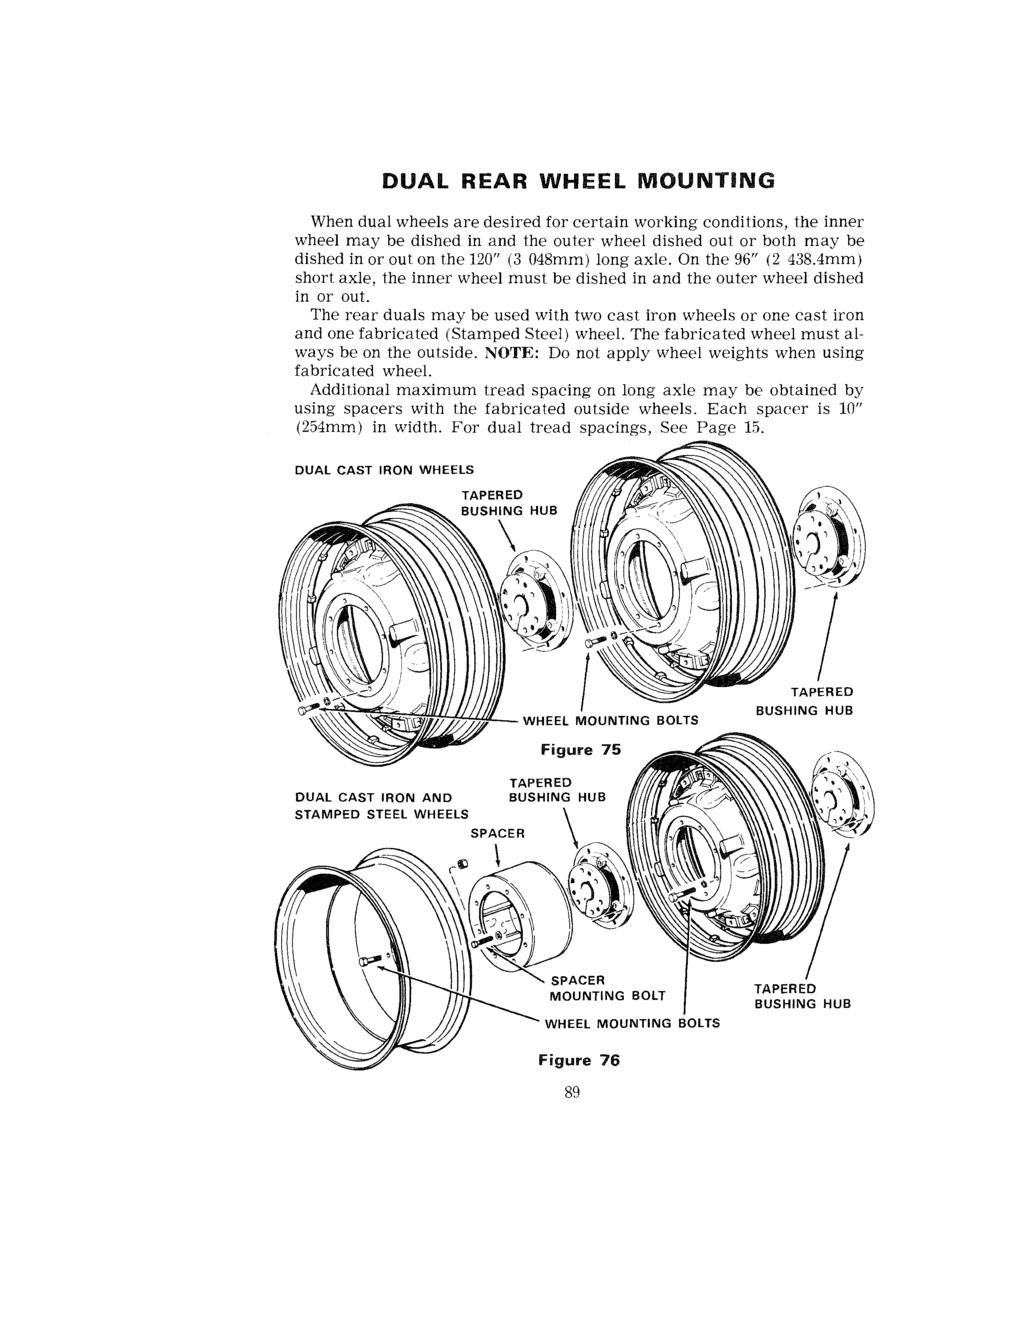 DUAL REAR WHEEL MOUNTING When dual wheels are desired for certain working conditions, the inner wheel may be dished in and the outer wheel dished out or both may be dished in or out on the 120" (3